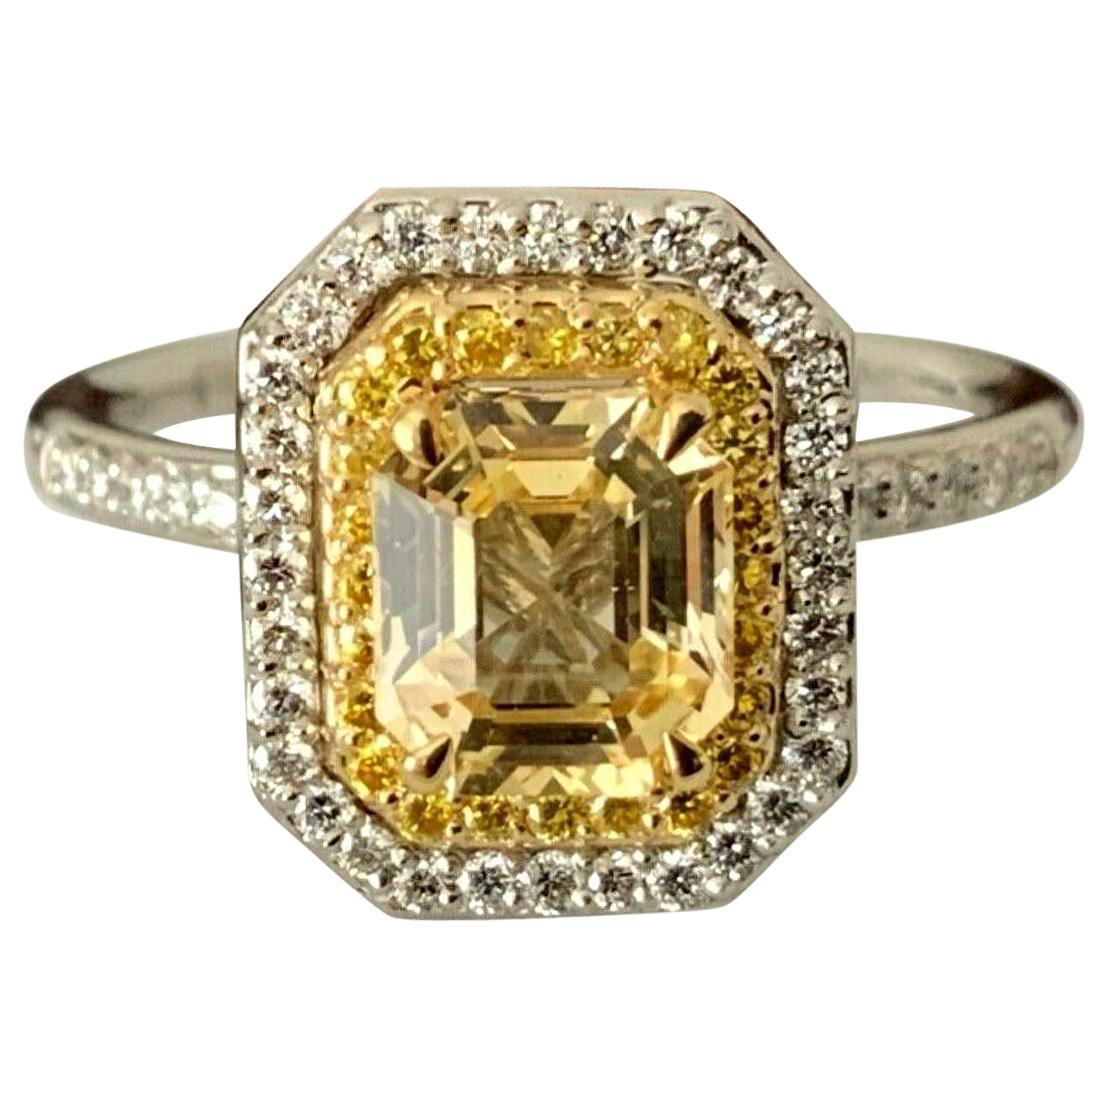 1.40 Carat Unheated Natural Yellow Sapphire and Diamond Ring GIA Certified For Sale